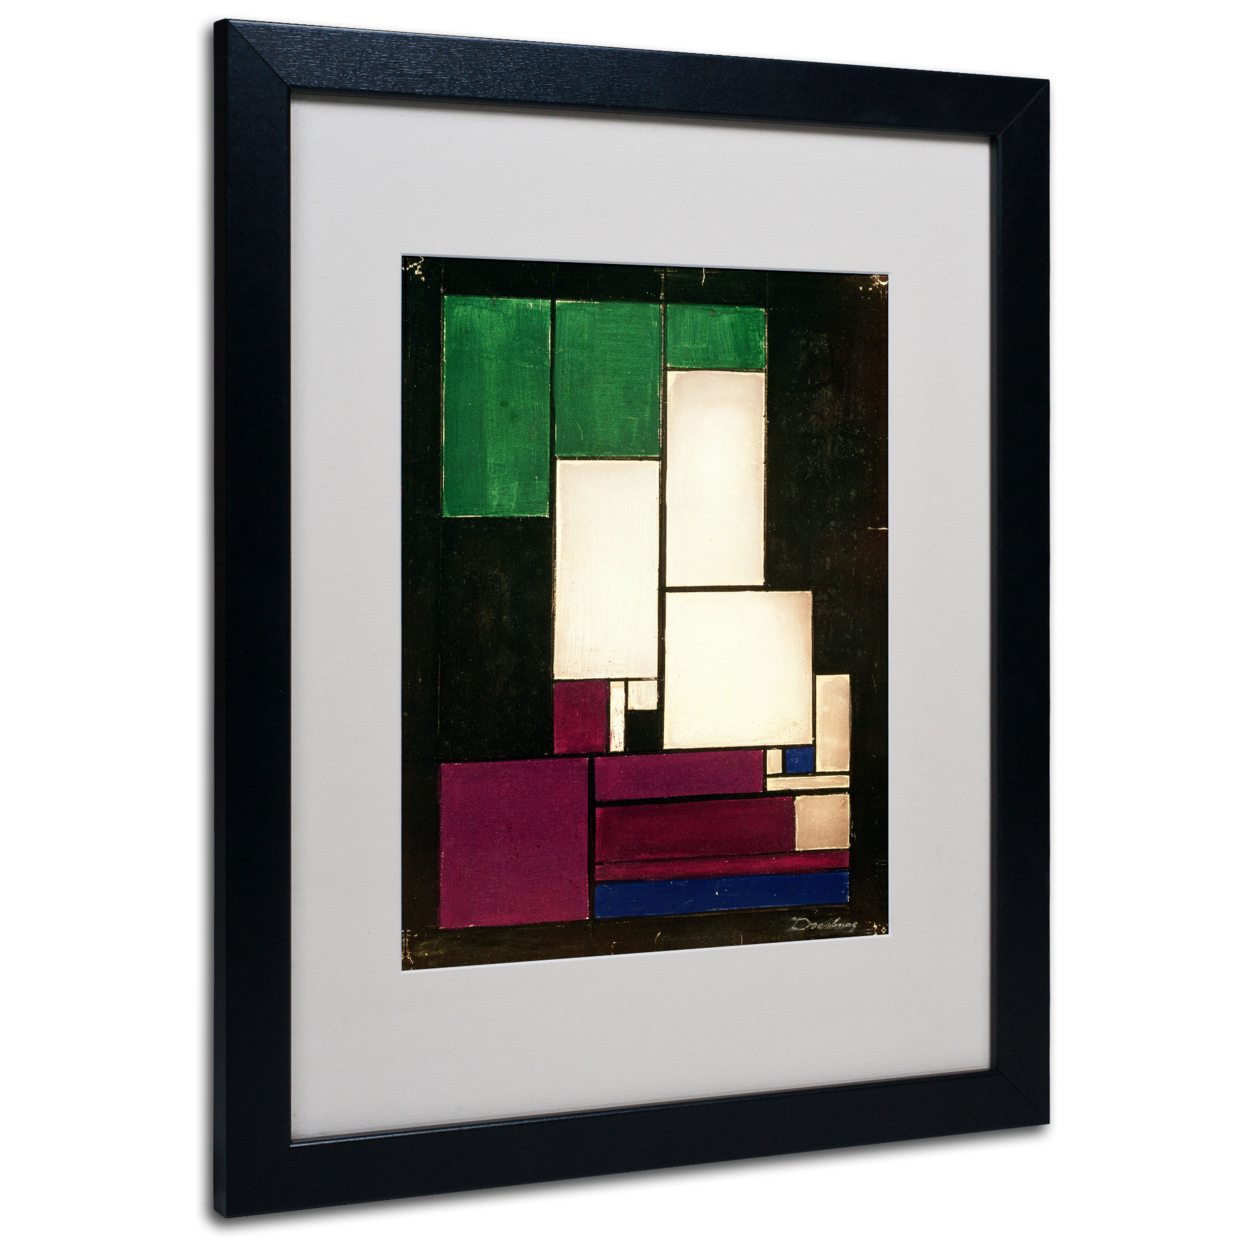 Theo Van Doesburg 'Composition 1922' Black Wooden Framed Art 18 X 22 Inches